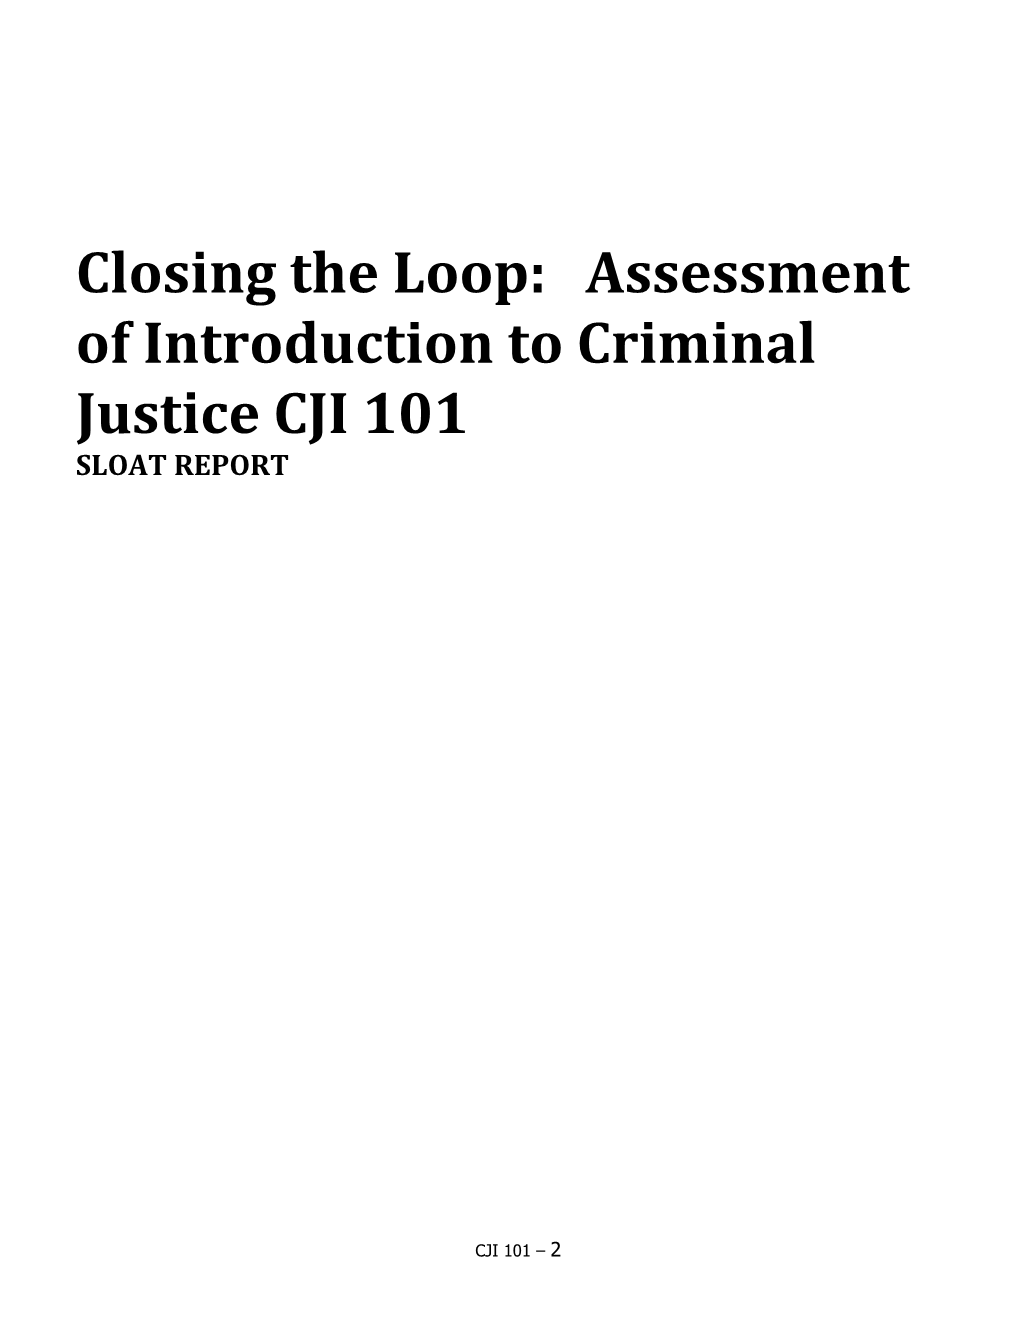 Closing the Loop: Assessment of Introduction to Criminal Justice CJI 101